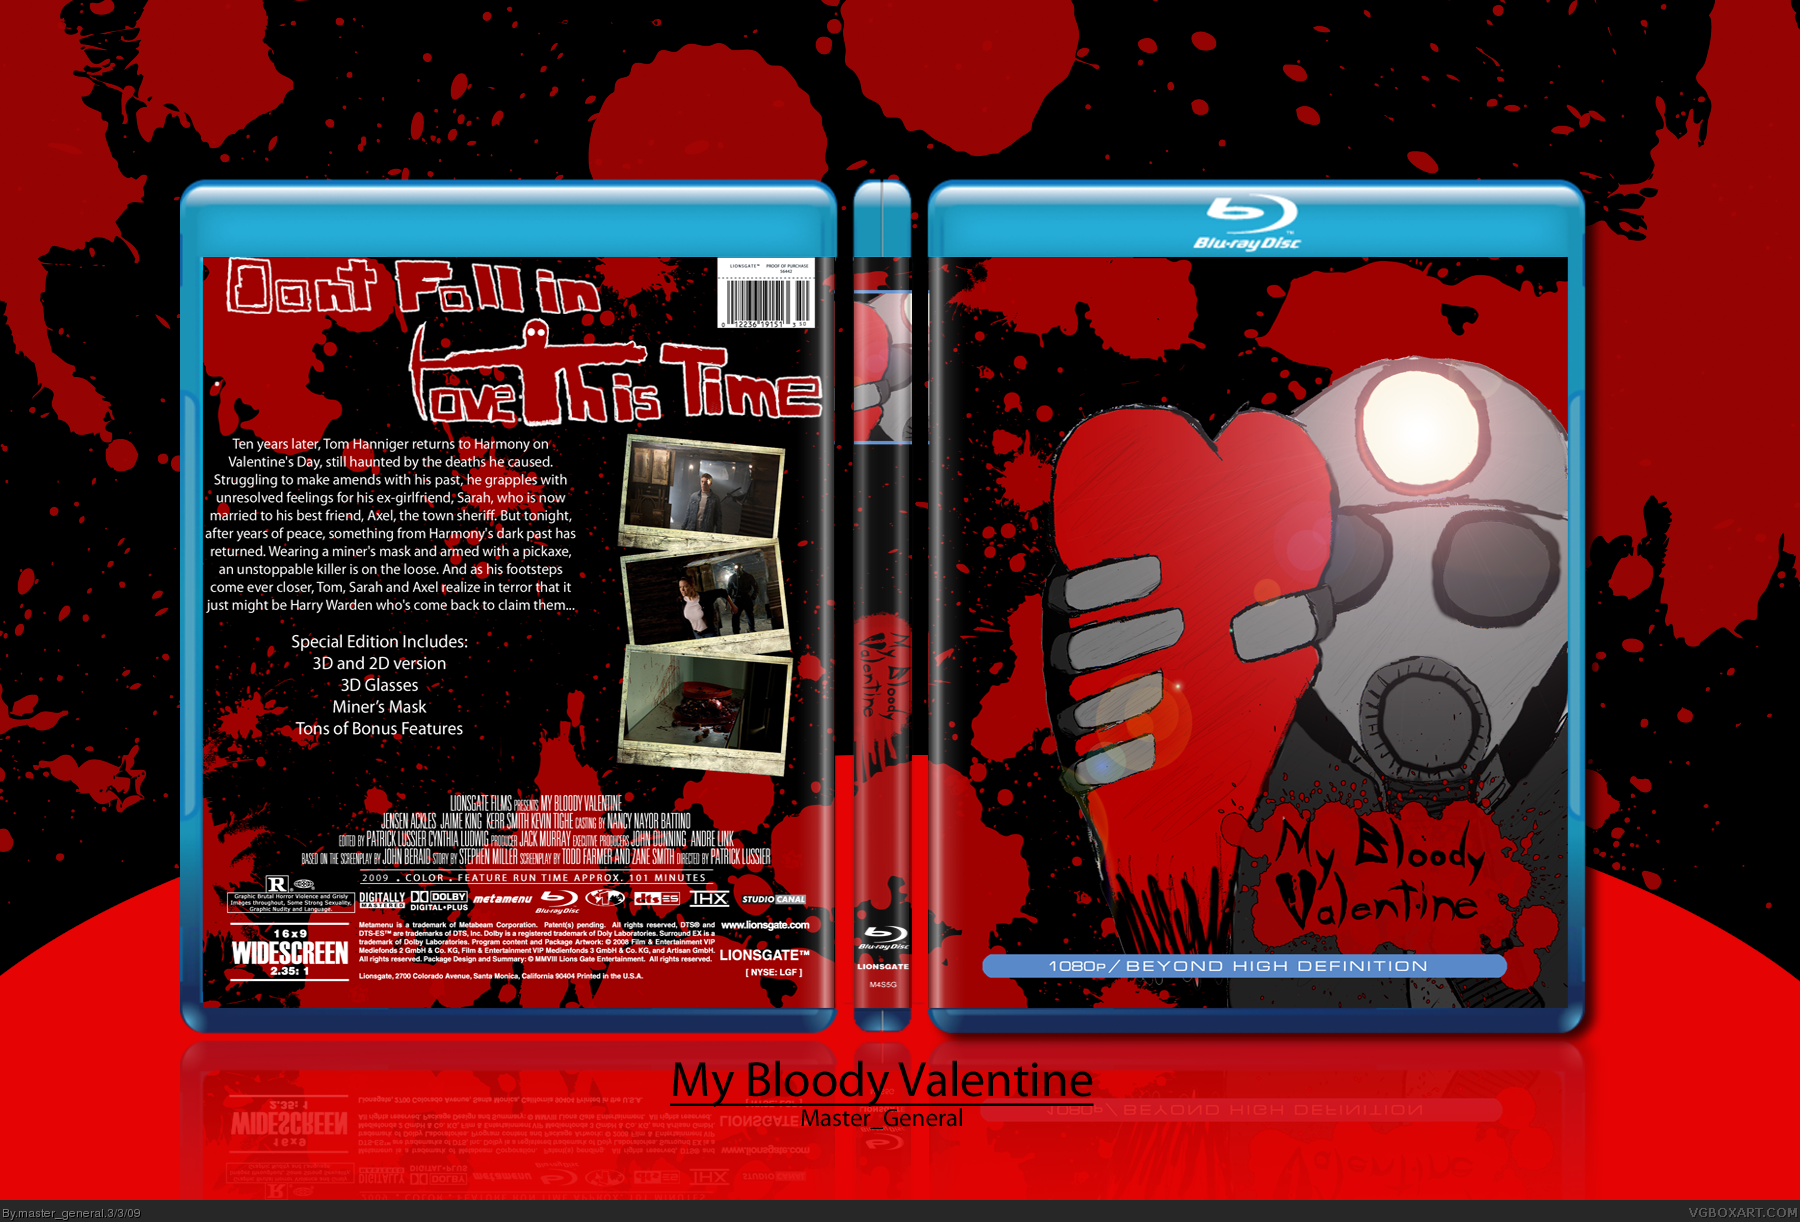 My Bloody Valentine 3D box cover